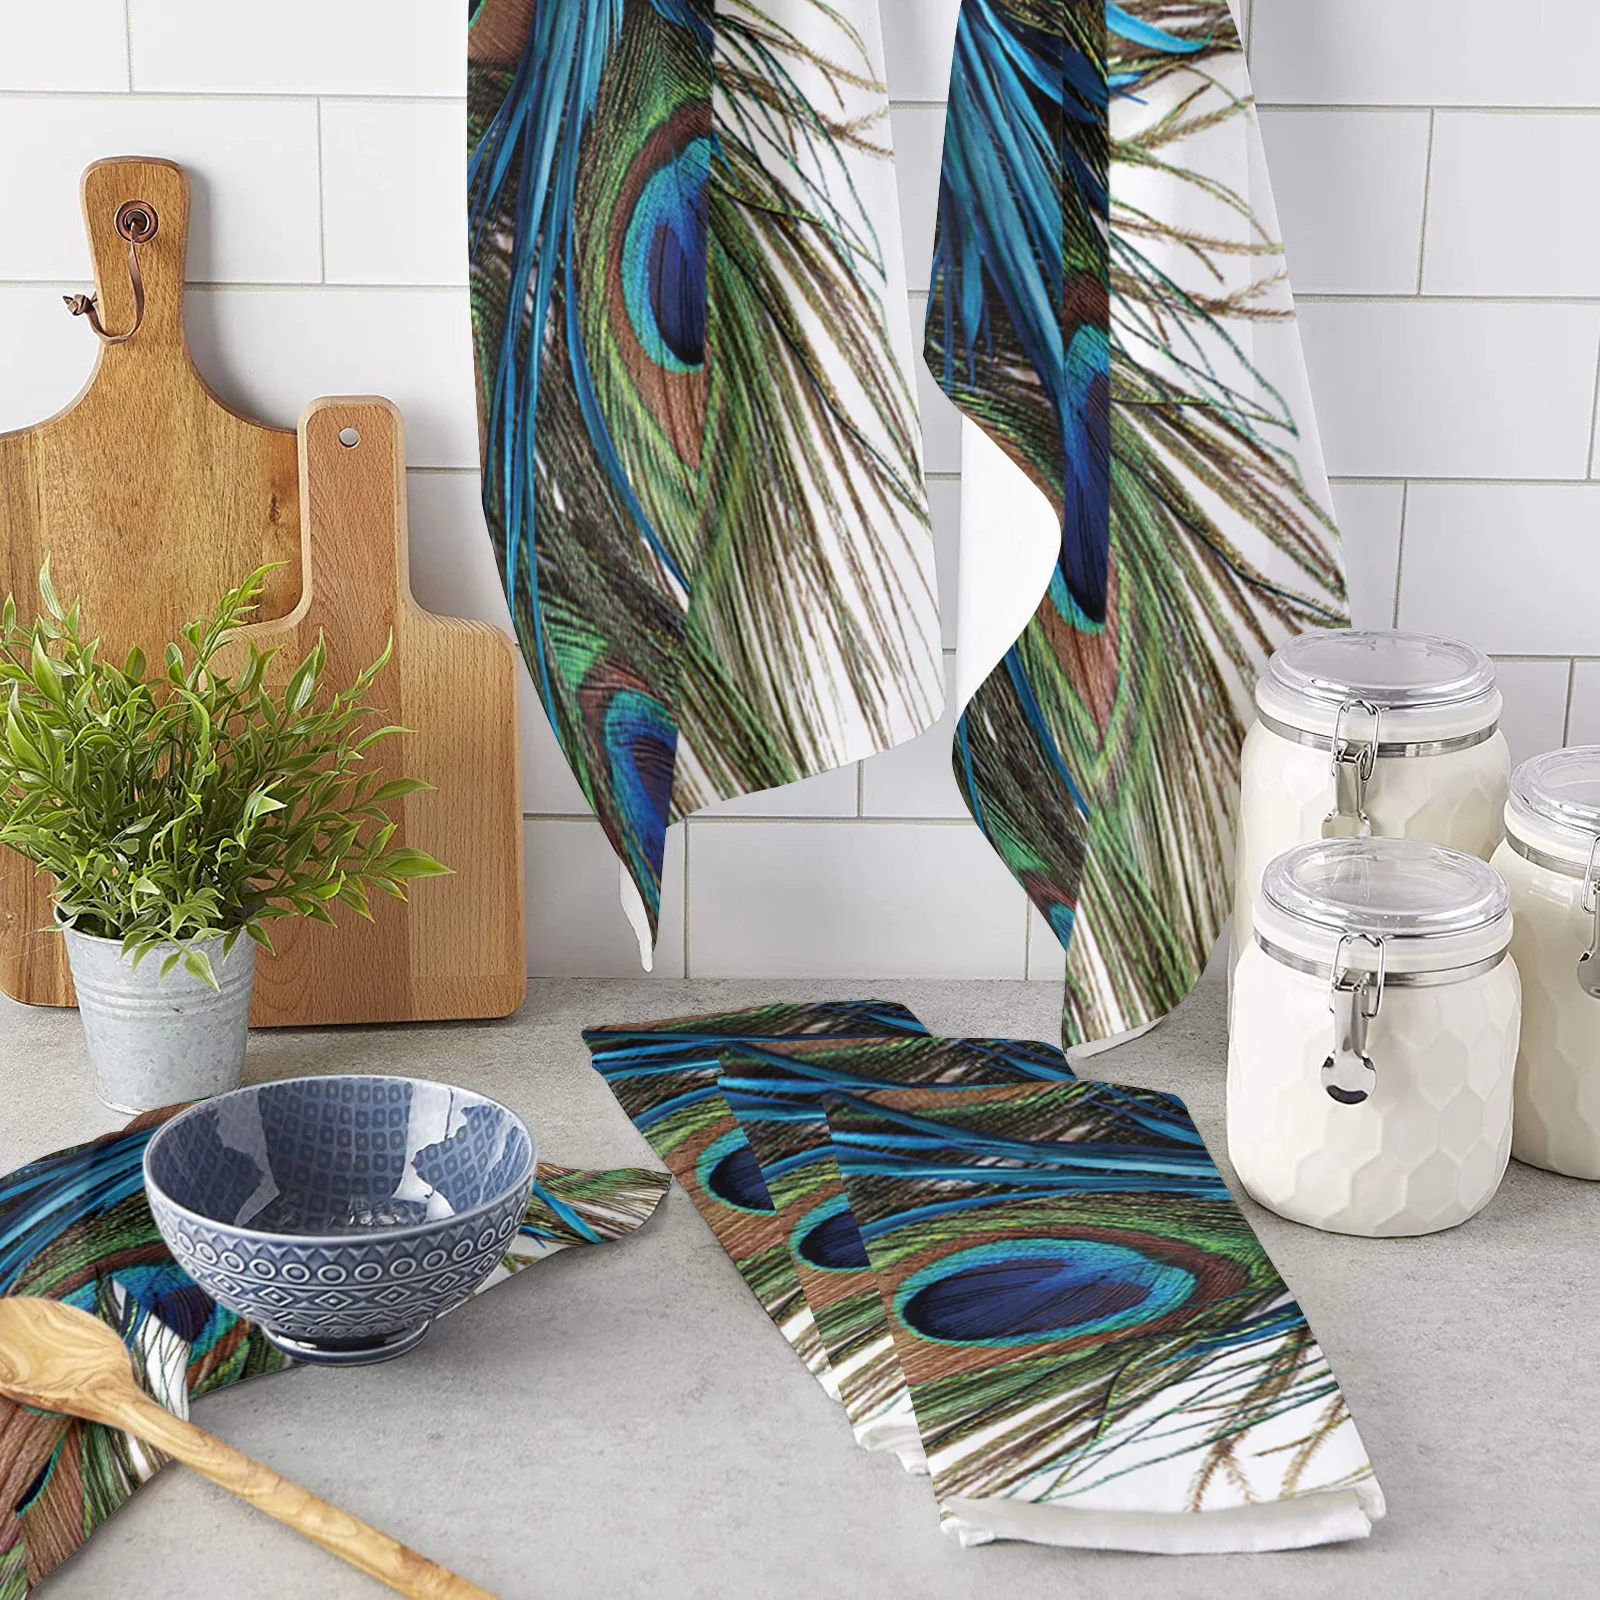 Peacock Feather Art Kitchen Towel Set Cleaning Cloth Kitchen Accessories Dish Washing Cloth Household Decoracion